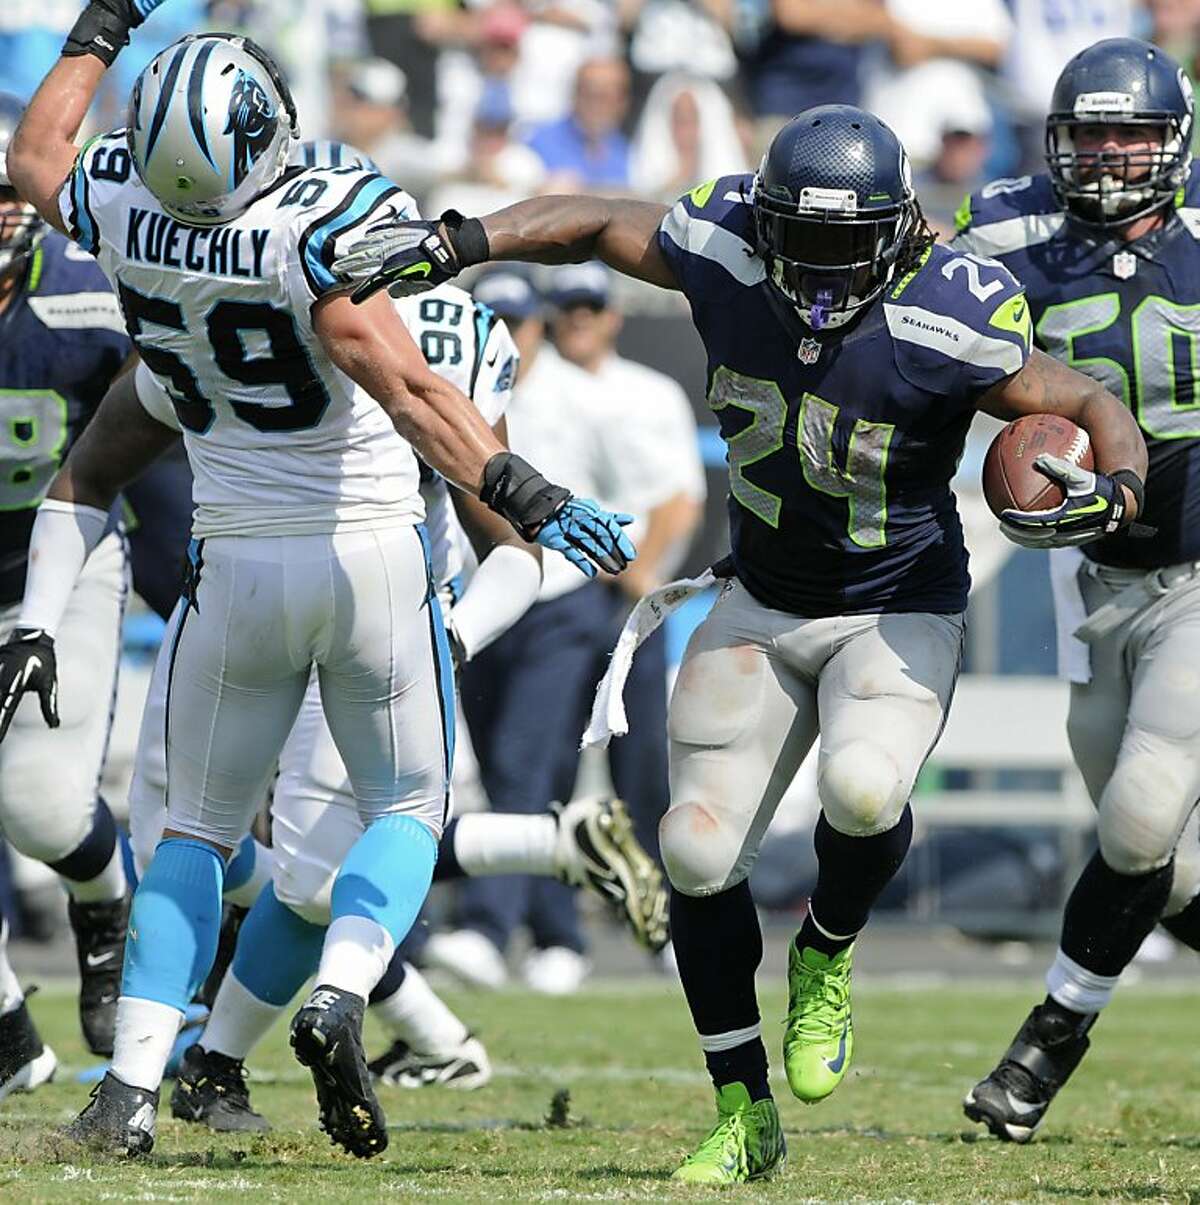 Seattle Seahawks' Marshawn Lynch (24) runs past Carolina Panthers' Luke Kuechly (59) during the second half of an NFL football game in Charlotte, N.C., Sunday, Sept. 8, 2013. Seattle won 12-7. (AP Photo/Mike McCarn)